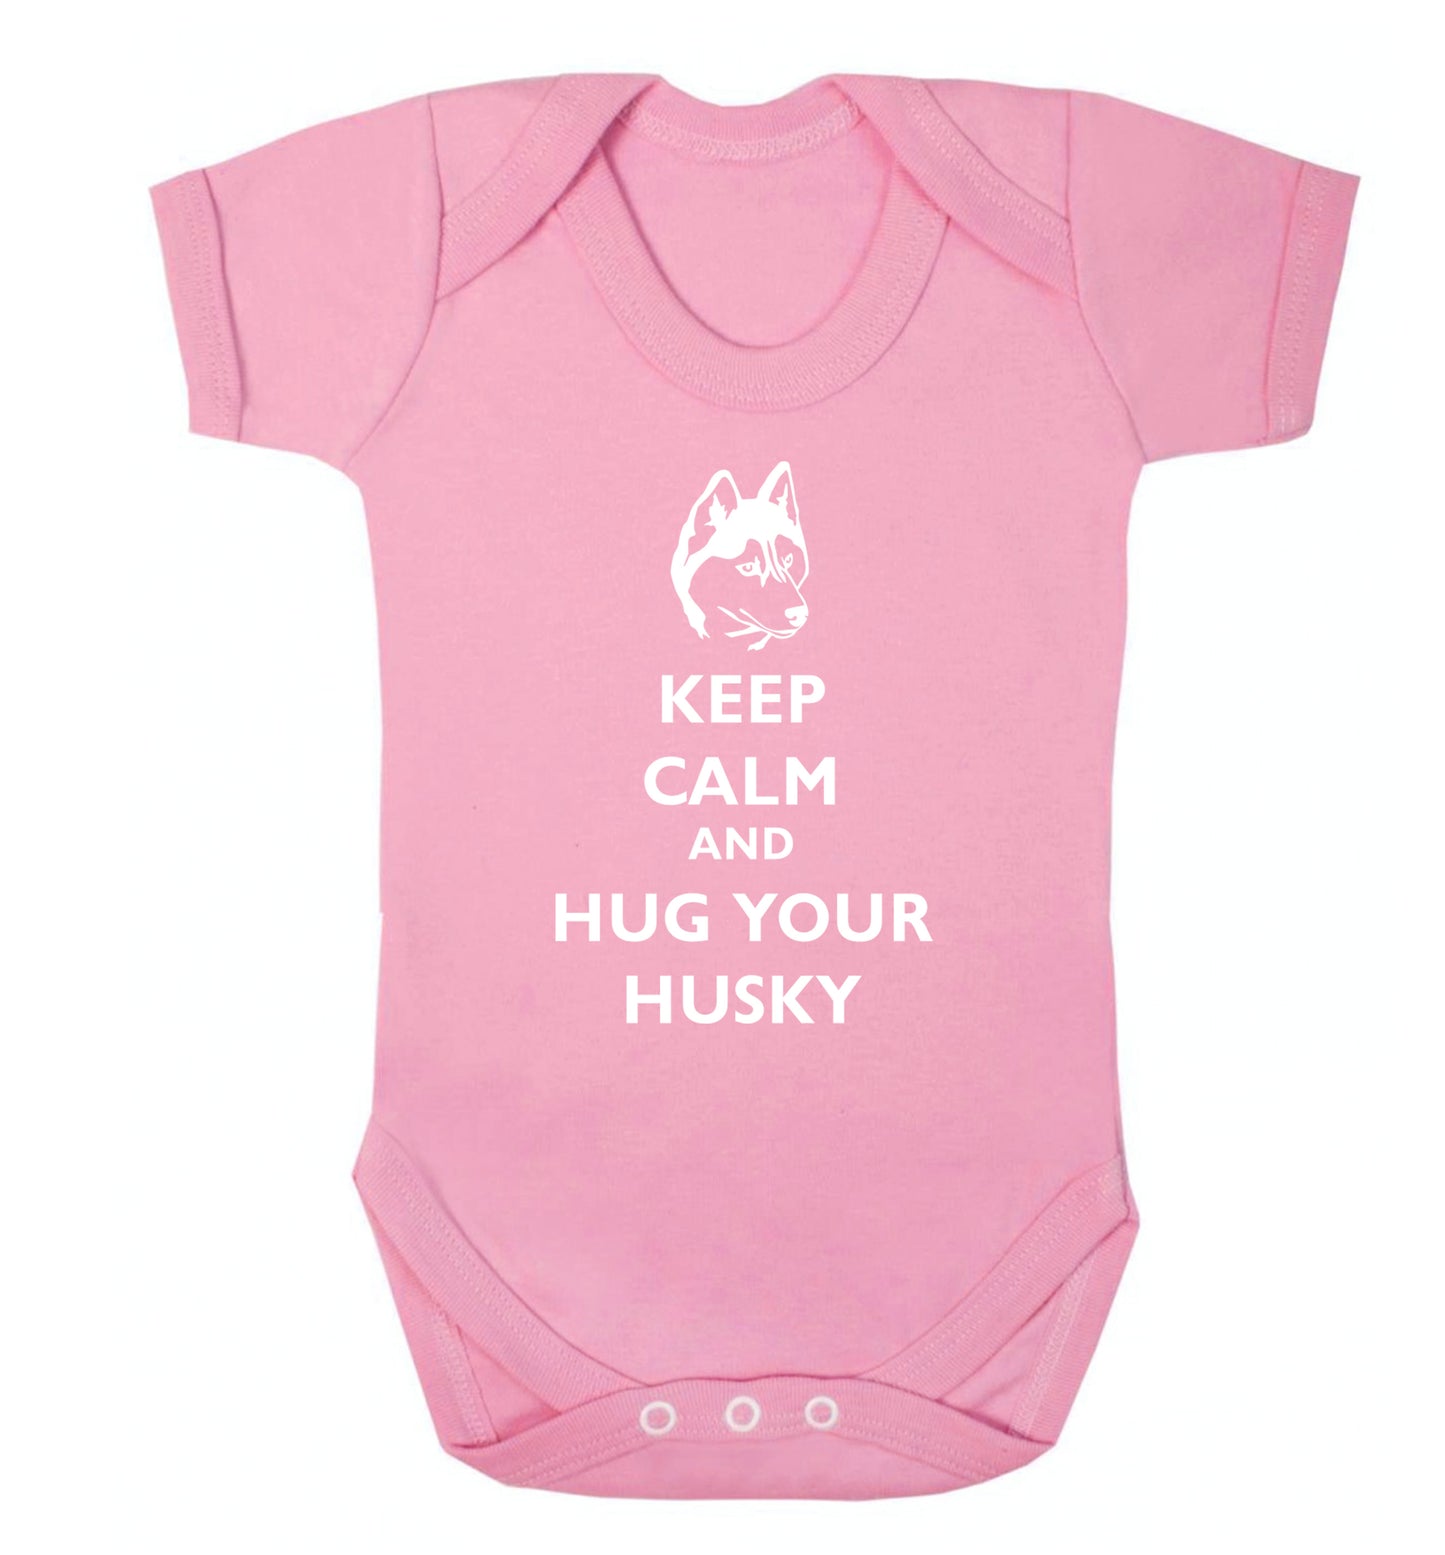 Keep calm and hug your husky Baby Vest pale pink 18-24 months